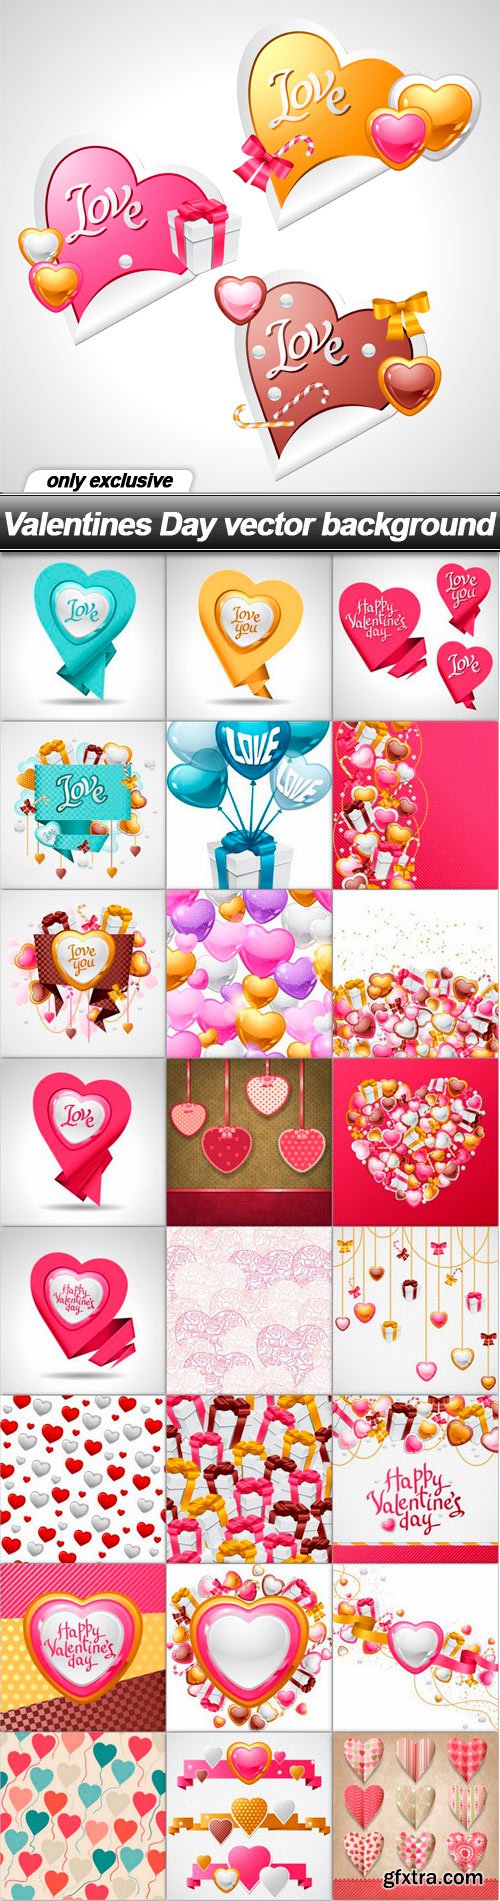 Valentines Day vector background - 25 EPS